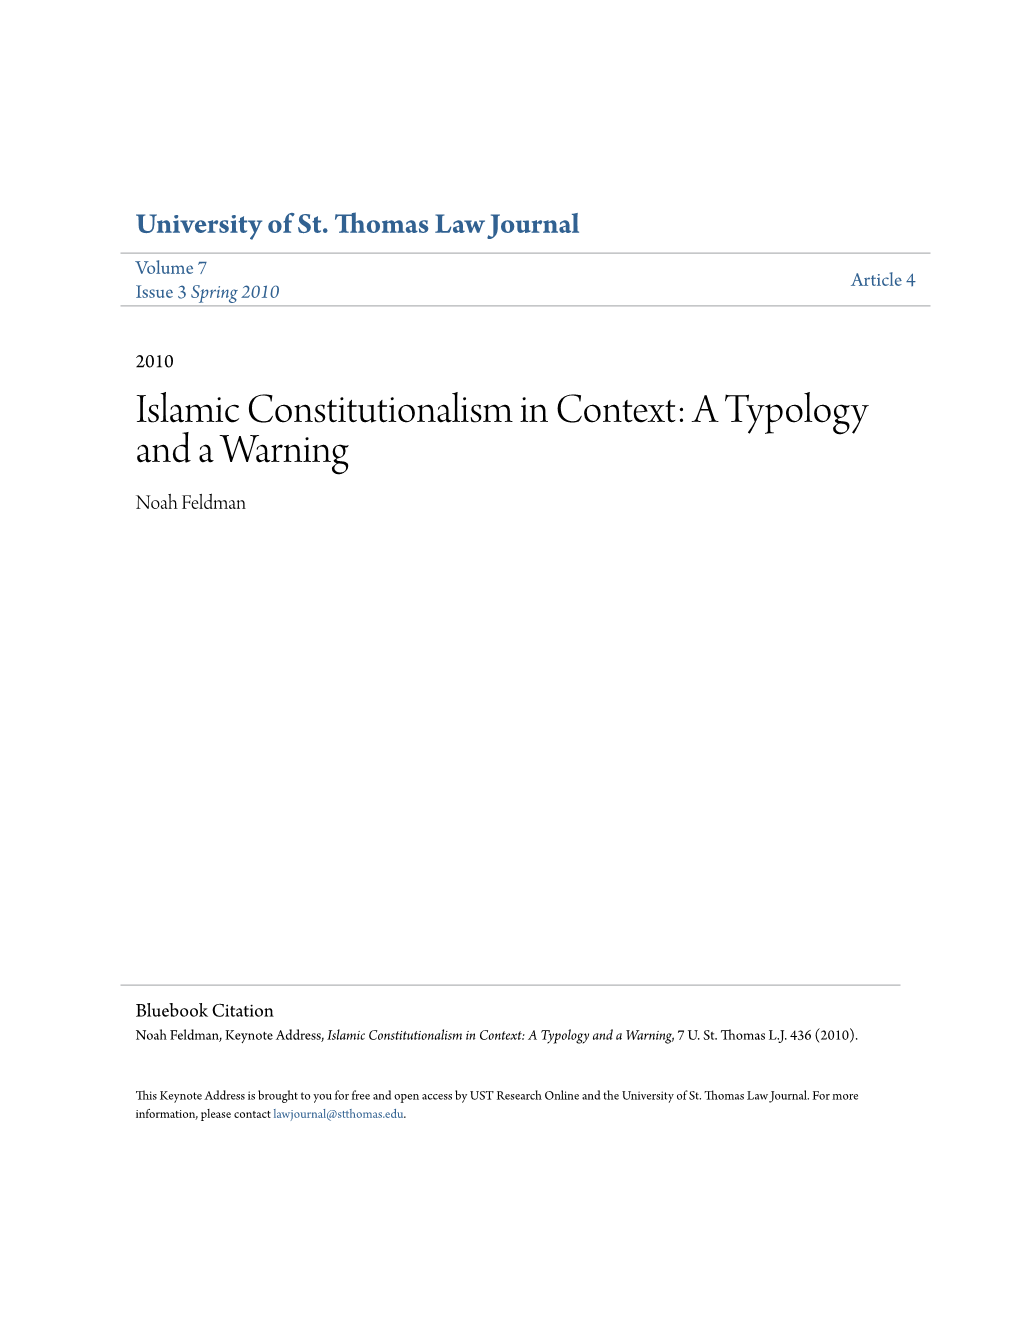 Islamic Constitutionalism in Context: a Typology and a Warning Noah Feldman